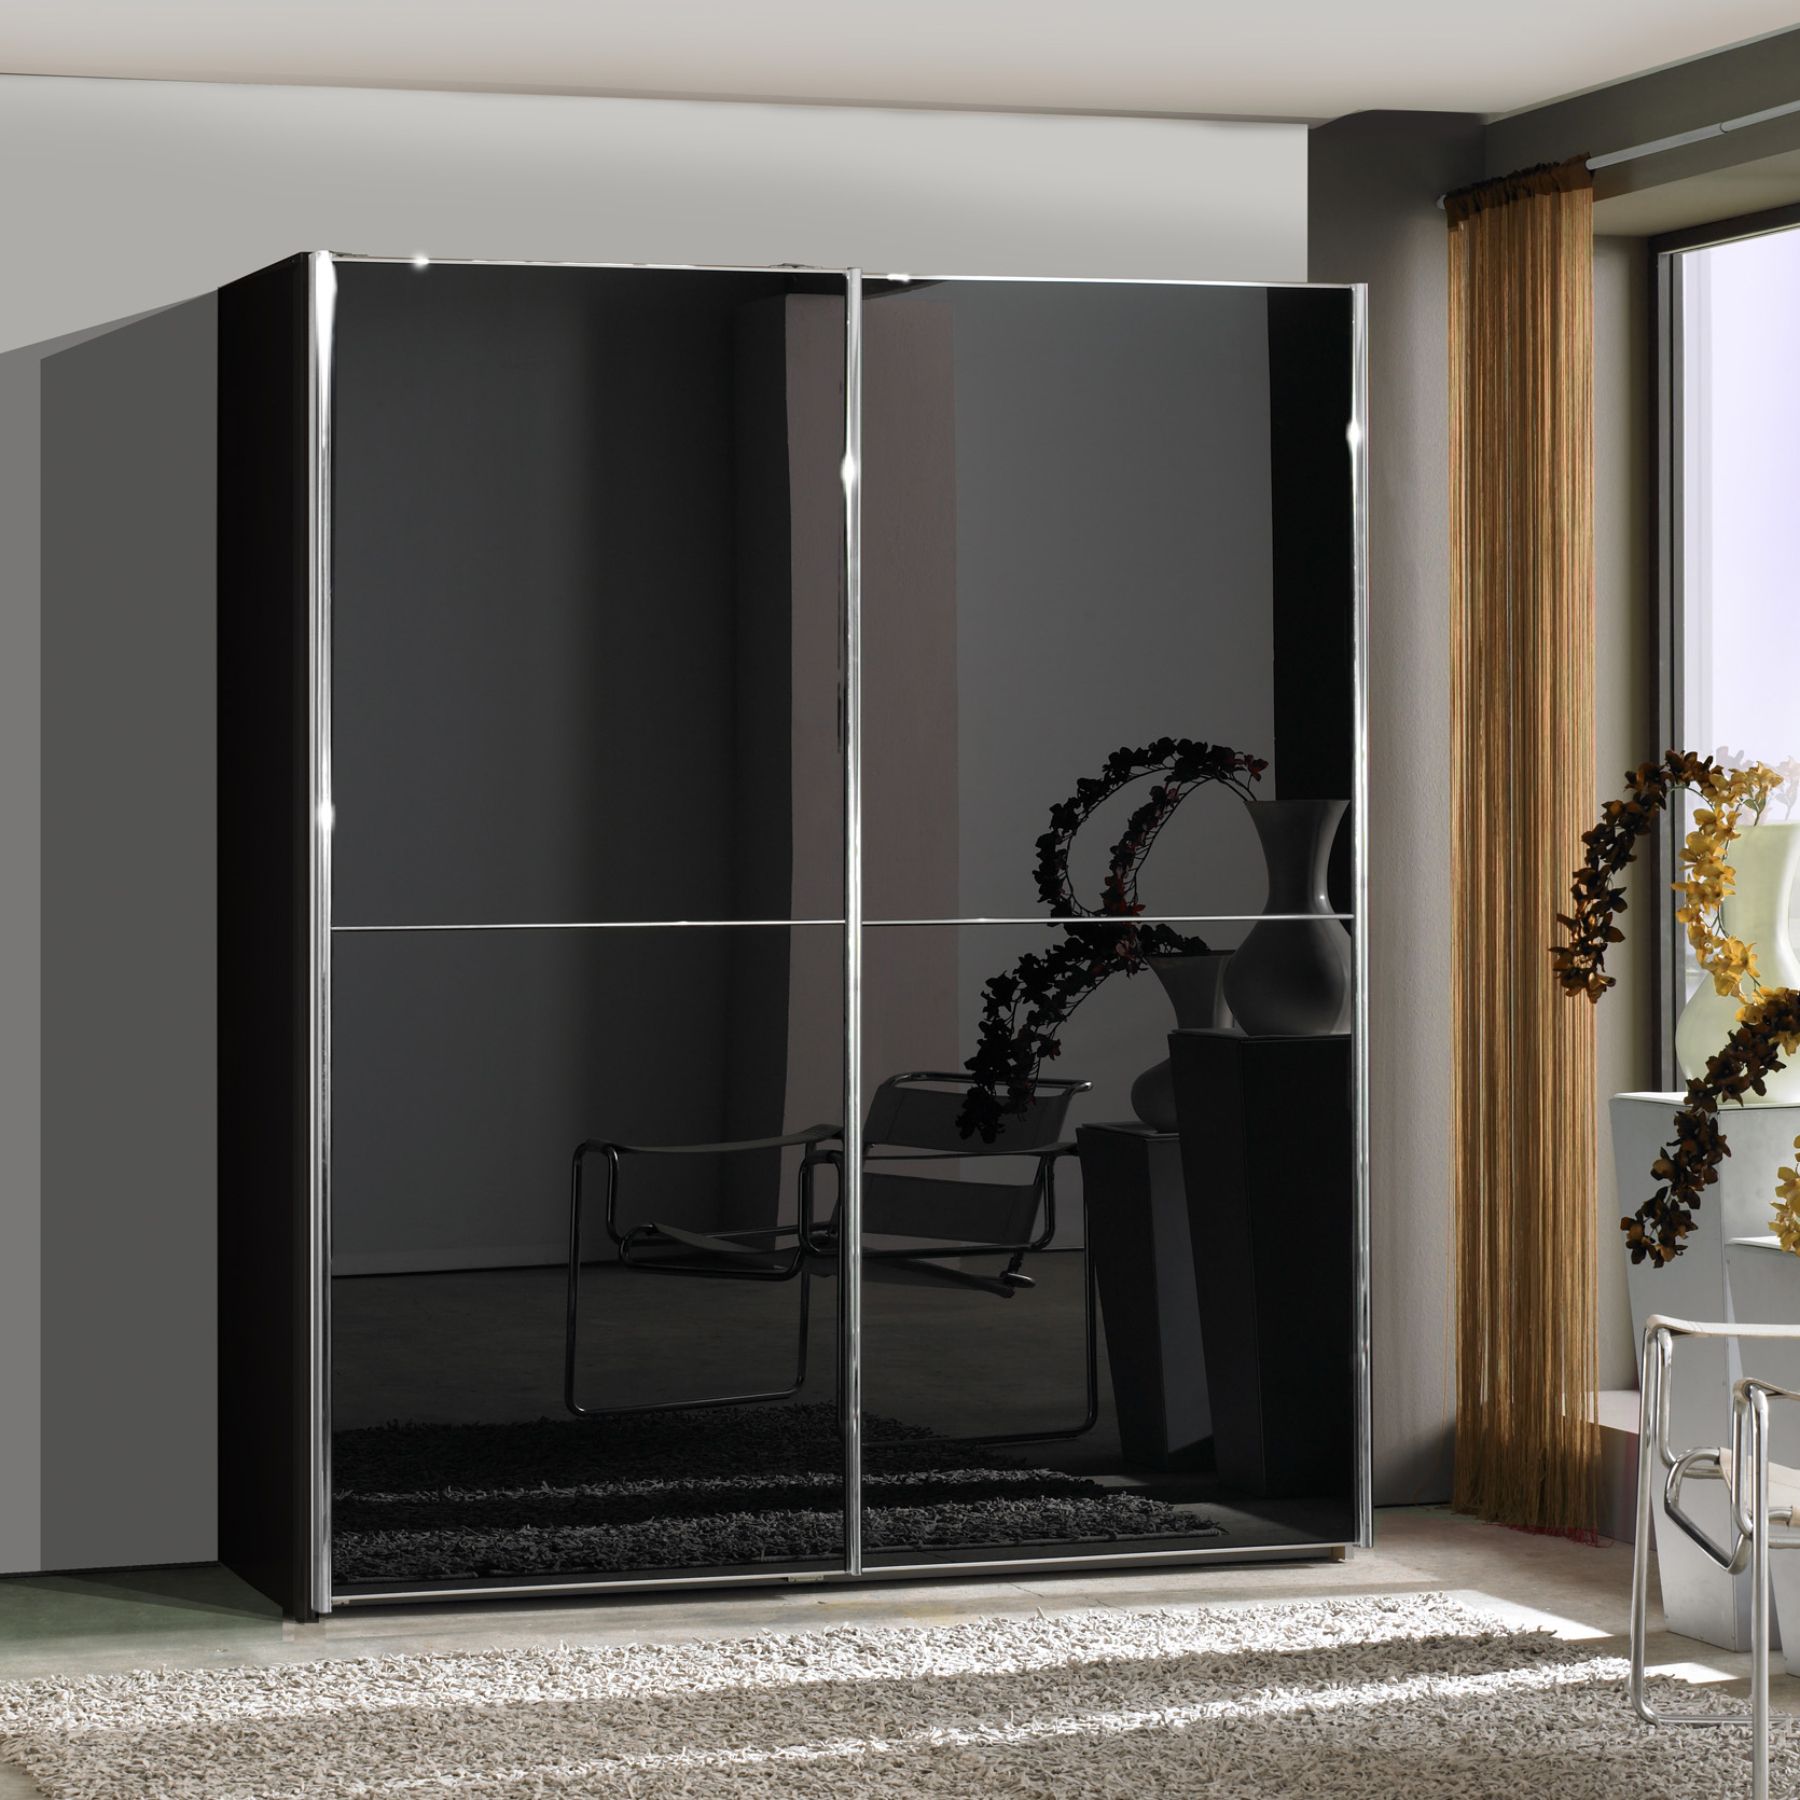 Monroe – Black Glass – 2 Door Sliding Wardrobe (4 Variable Sizes) –  Semi Fitted Wardrobes – Progressive Furnishings Intended For Black Glass Wardrobes (View 13 of 15)